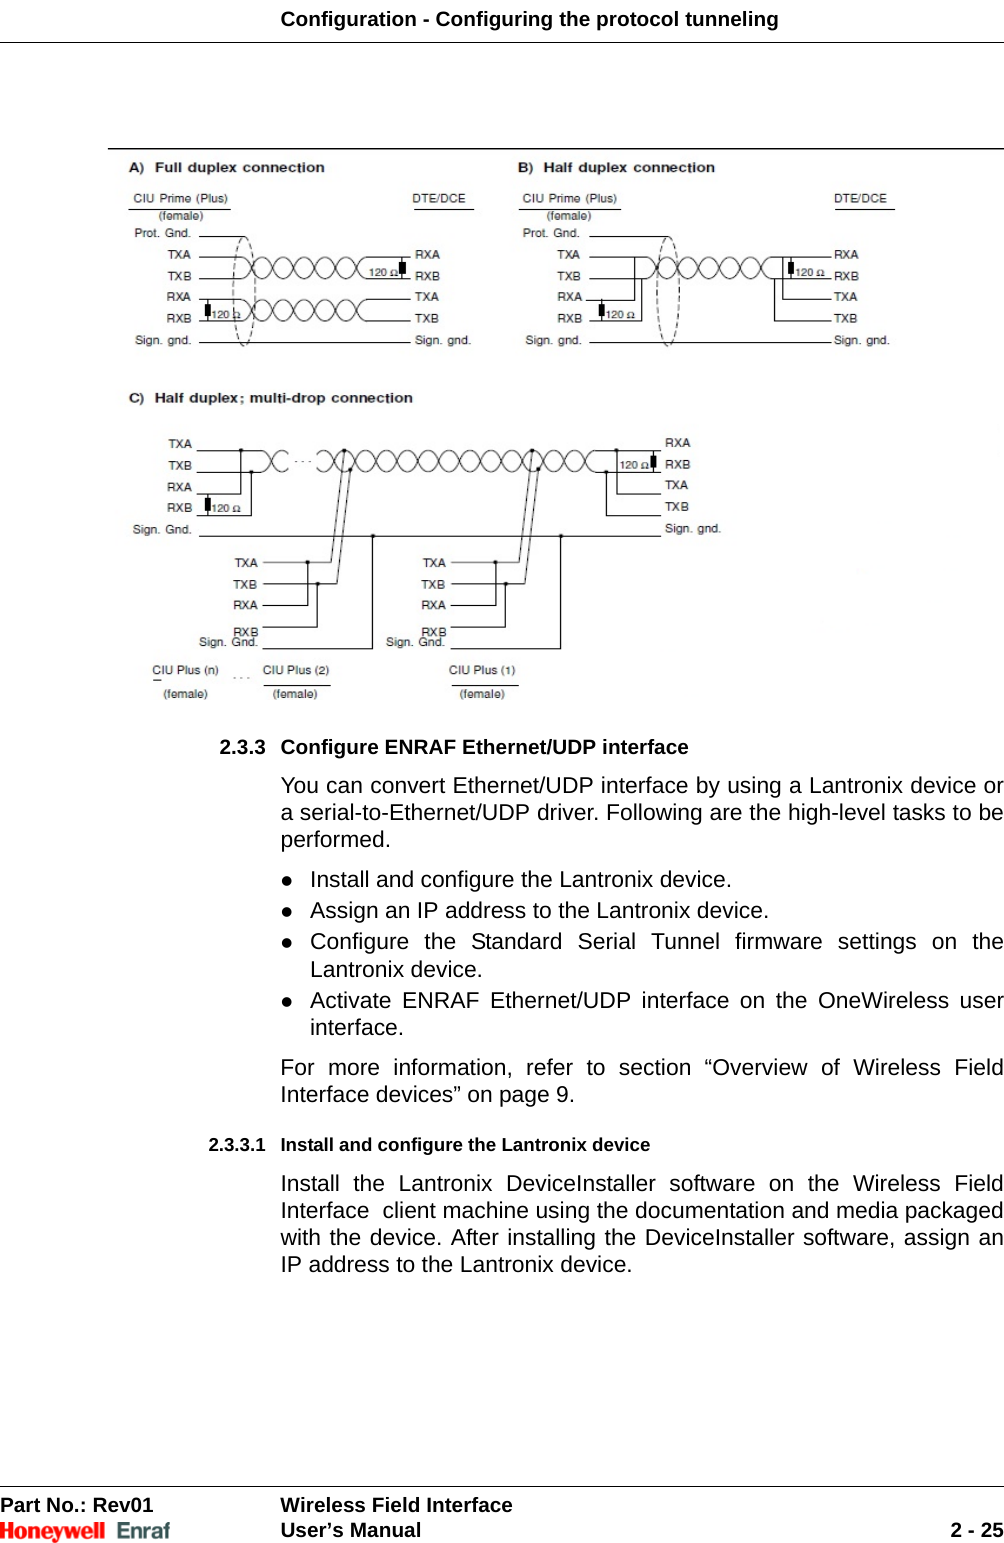 Configuration - Configuring the protocol tunnelingPart No.: Rev01  Wireless Field InterfaceUser’s Manual 2 - 252.3.3 Configure ENRAF Ethernet/UDP interfaceYou can convert Ethernet/UDP interface by using a Lantronix device or a serial-to-Ethernet/UDP driver. Following are the high-level tasks to be performed.Install and configure the Lantronix device. Assign an IP address to the Lantronix device. Configure the Standard Serial Tunnel firmware settings on the Lantronix device. Activate ENRAF Ethernet/UDP interface on the OneWireless user interface. For more information, refer to section “Overview of Wireless Field Interface devices” on page 9.2.3.3.1 Install and configure the Lantronix deviceInstall the Lantronix DeviceInstaller software on the Wireless Field Interface  client machine using the documentation and media packaged with the device. After installing the DeviceInstaller software, assign an IP address to the Lantronix device.